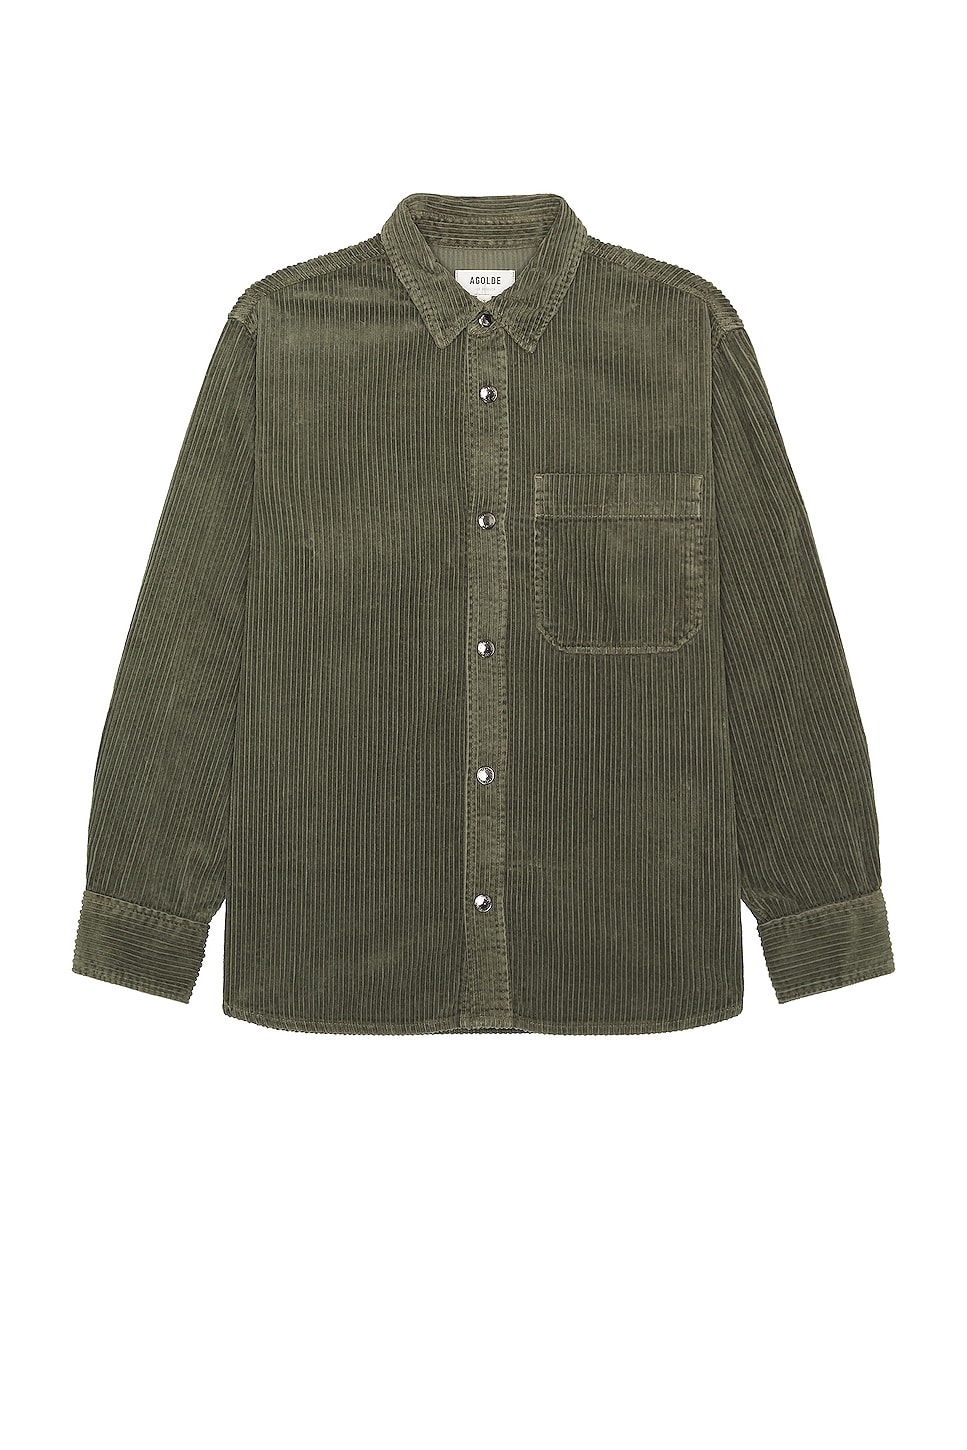 Image 1 of AGOLDE Odele Shirt in Lawn